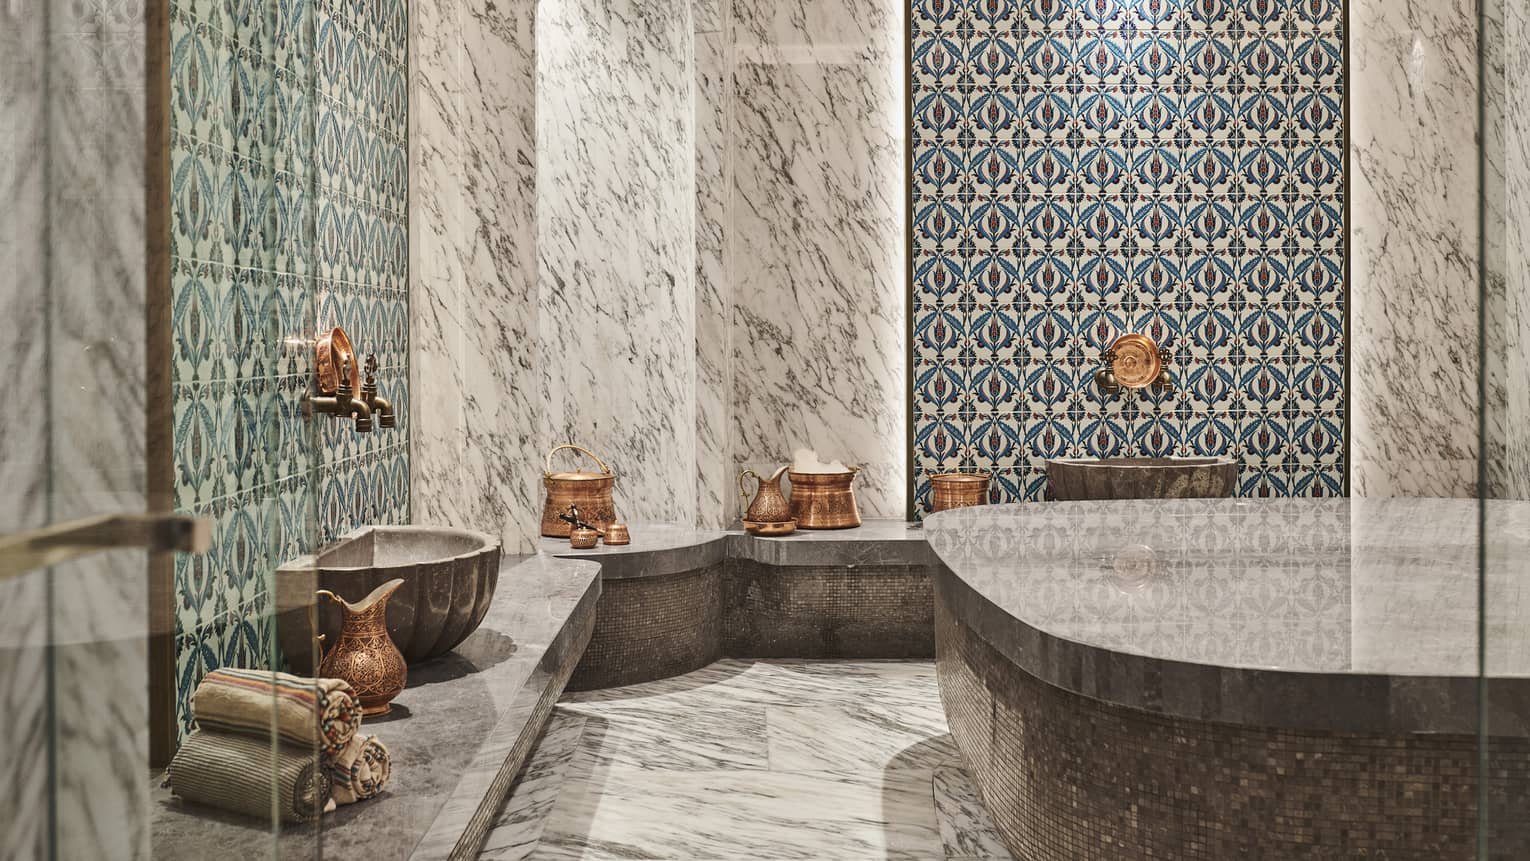 Steam shower with mosaic tile and full marble walls, floor and benches, and brass urns